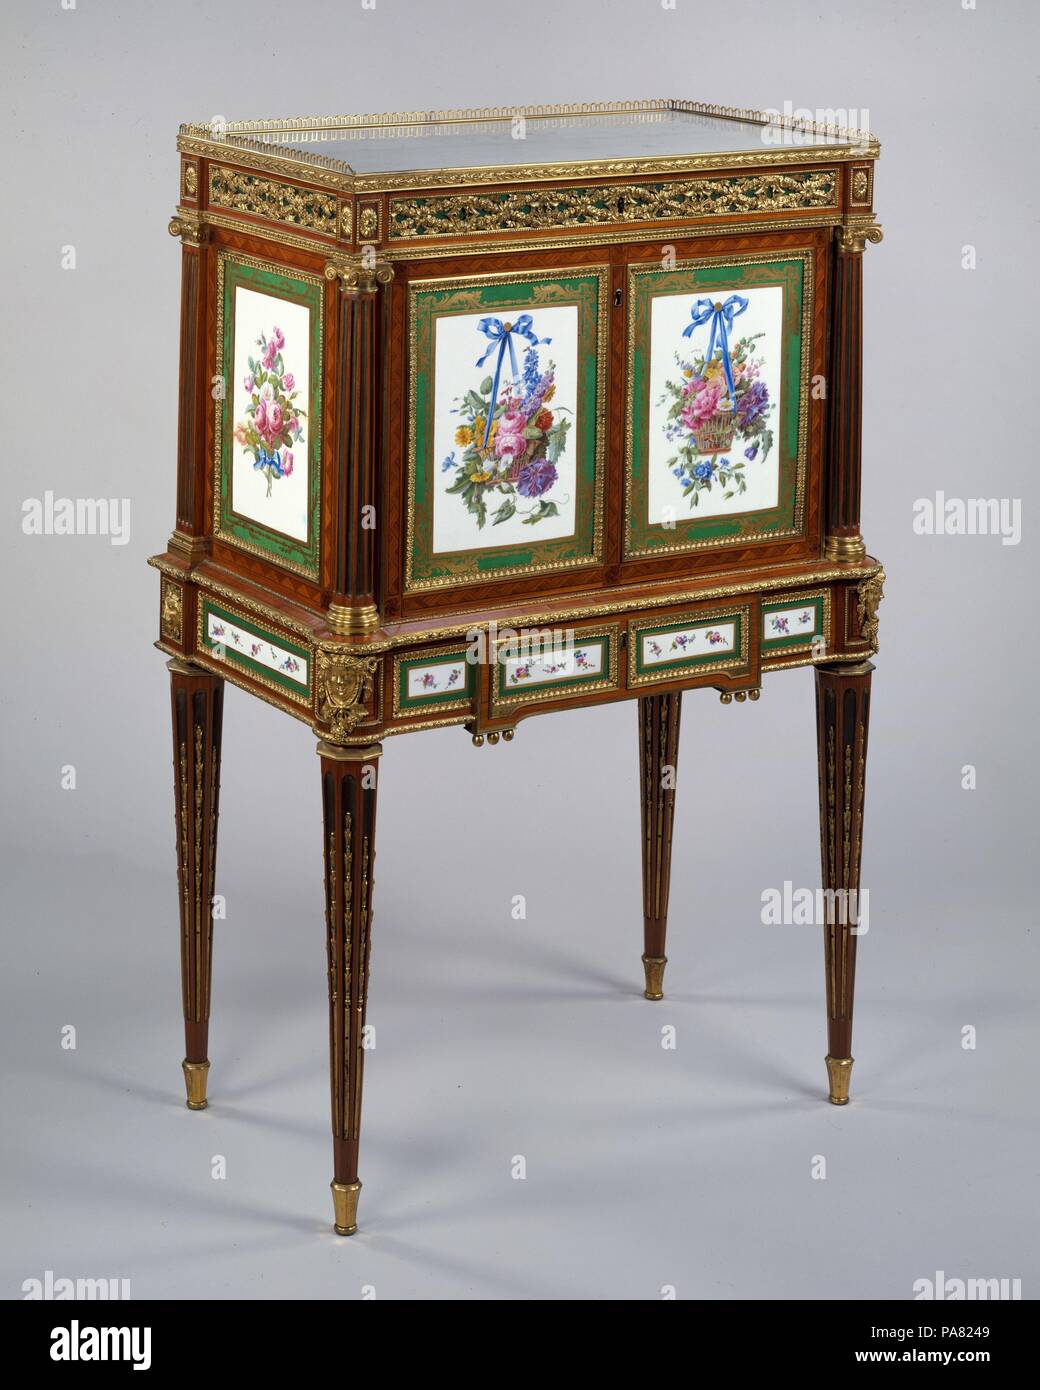 Secretary. Artist: Attributed to Martin Carlin (French, near Freiburg im Breisgau ca. 1730-1785 Paris); Sèvres Manufactory (French, 1740-present) (soft-paste porcelain plaques); various French painters, Paris (soft-paste porcelain plaques). Dimensions: H. 120.3 cm, W. 80 cm, D. 45.7 cm. Date: ca. 1781-85.  This upright rectangular drop-front secrétaire is thought to have come from the Parisian workshop of the French cabinetmaker ('maitre-ébeniste') Martin Carlin. From his quarters in the Rue de Faubourg Saint-Antoine, Carlin produced writing-desks, commodes, and secretaires inset with porcelai Stock Photo